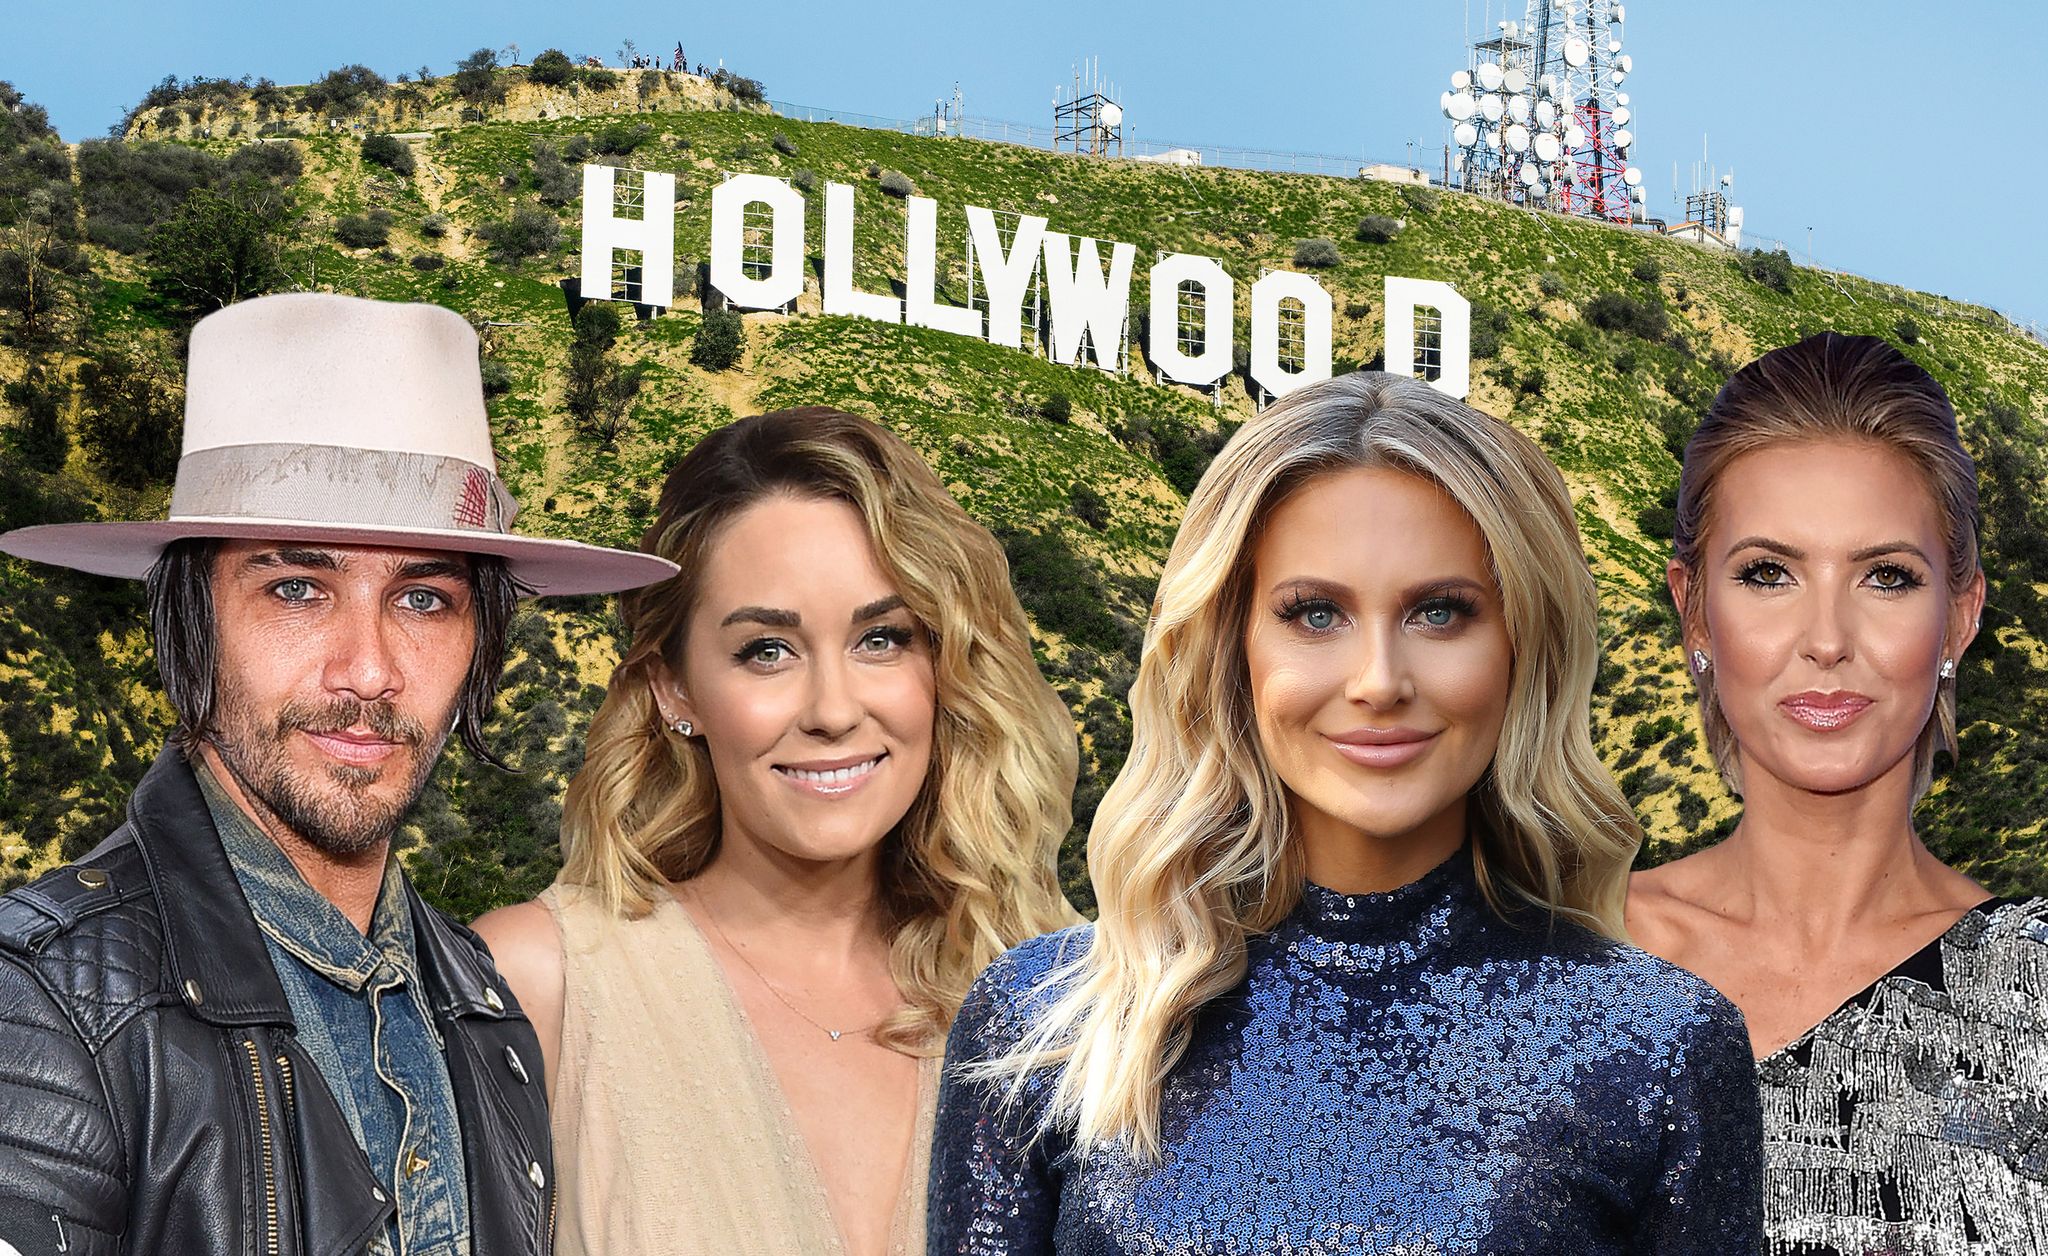 The Hills' cast: Where are they now?